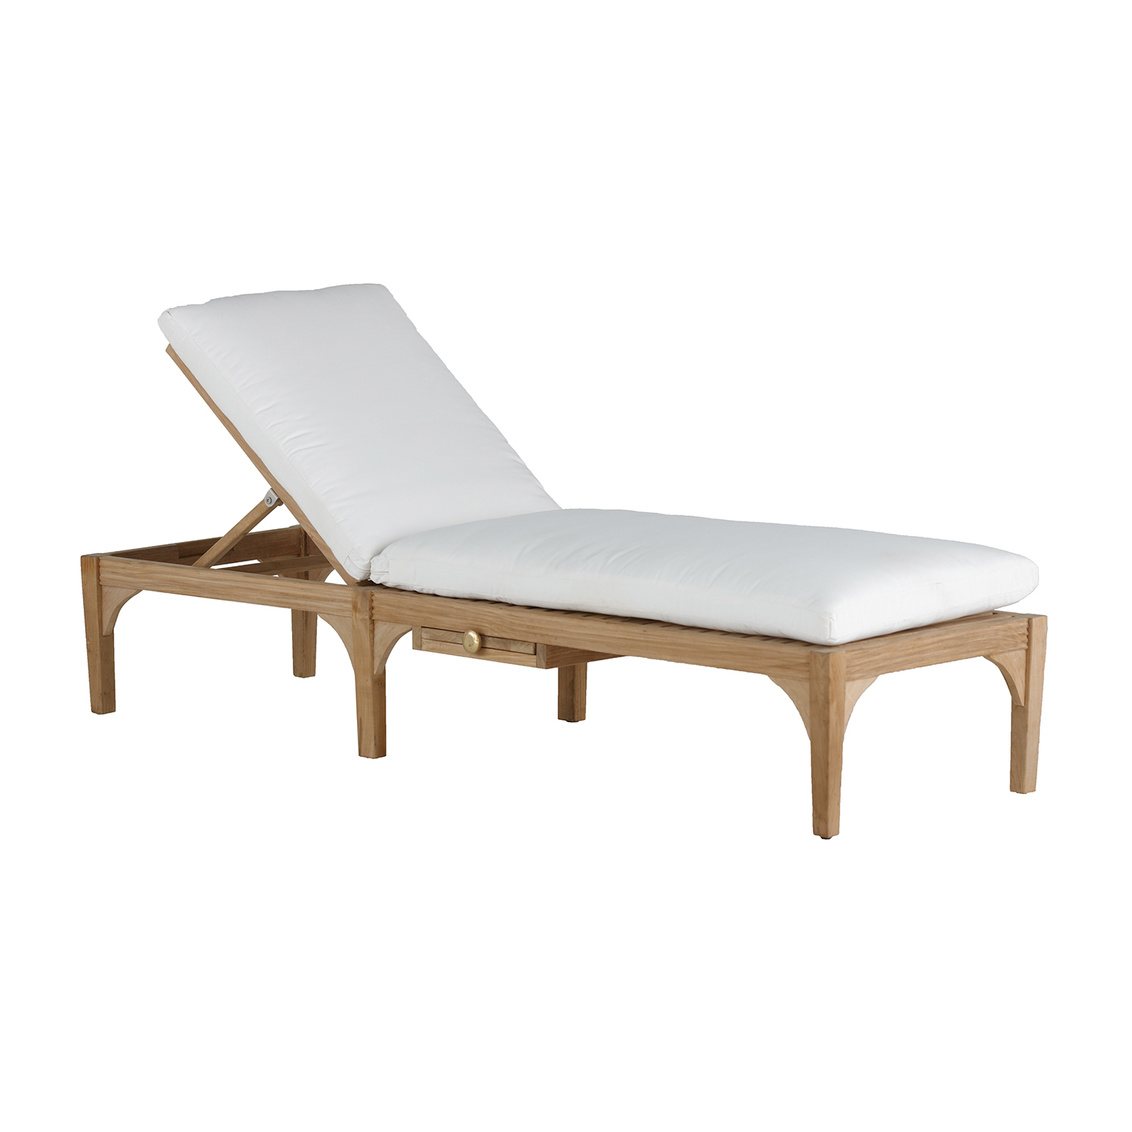 club small chaise lounge with wheel in natural teak – frame only product image